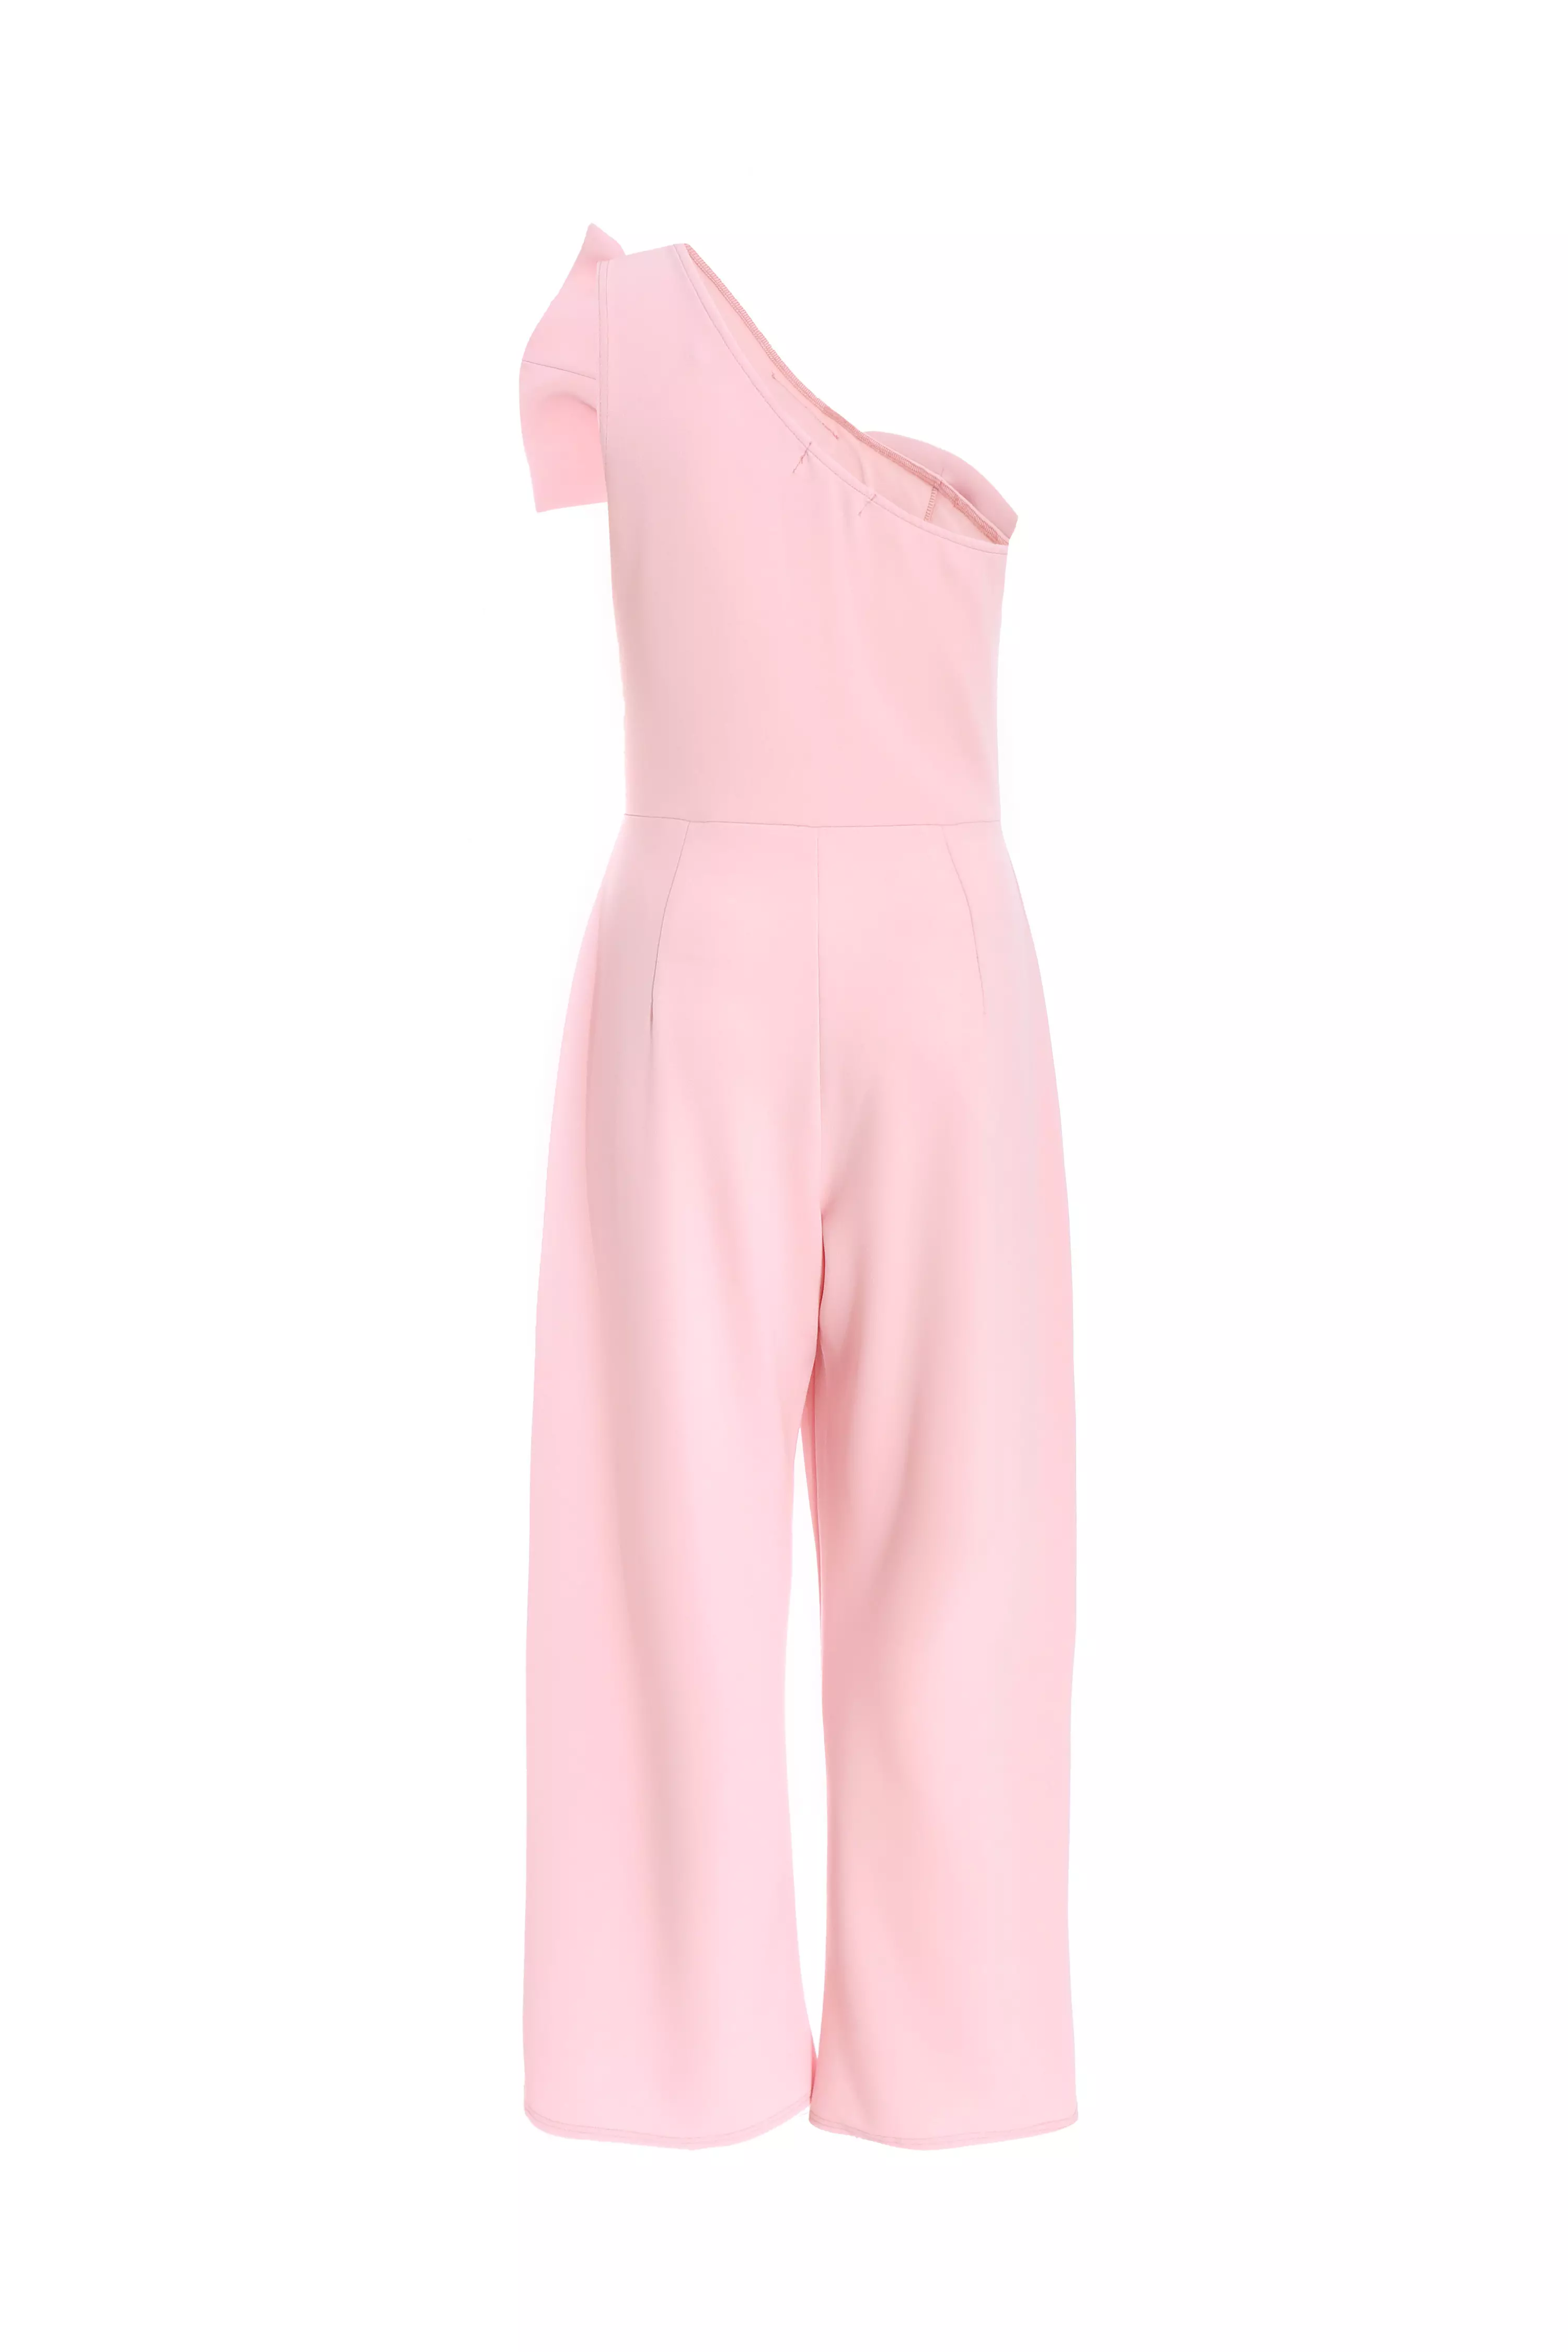 Pink One Shoulder Bow Palazzo Jumpsuit